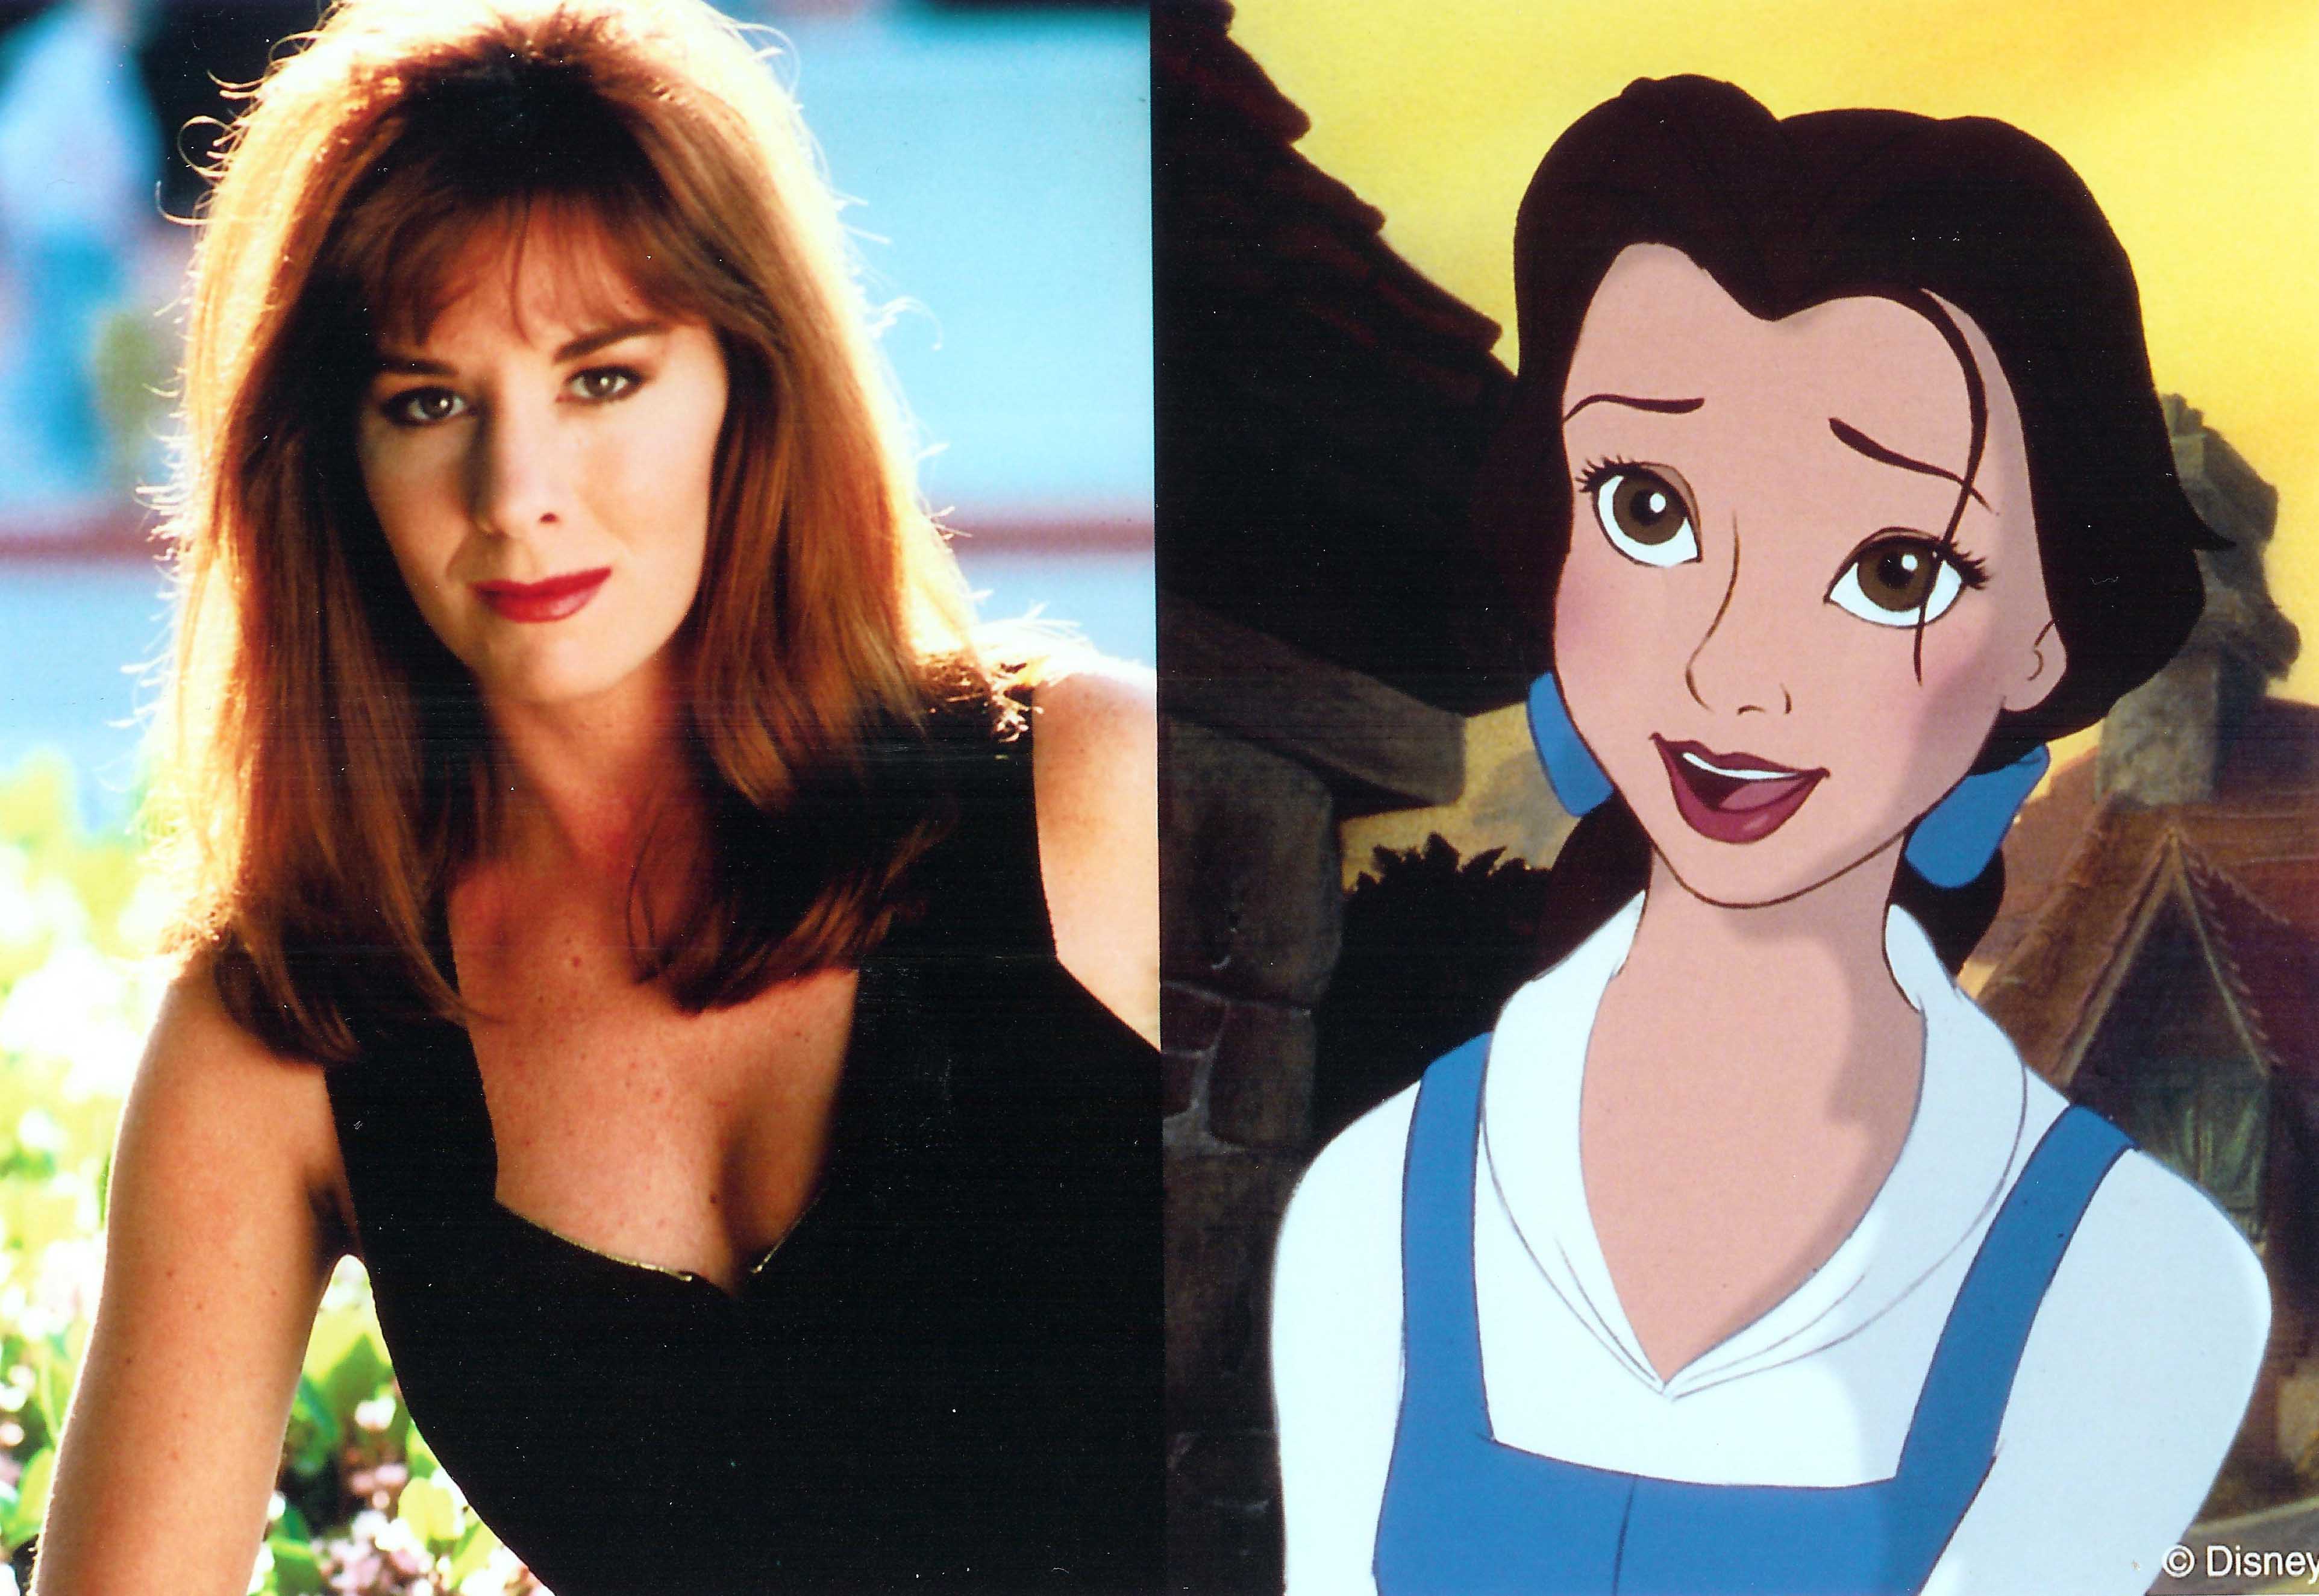 9 Disney Princess Siap Diundang Wreck-It Ralph 2 - Voice Of Belle In Beauty And The Beast 1991